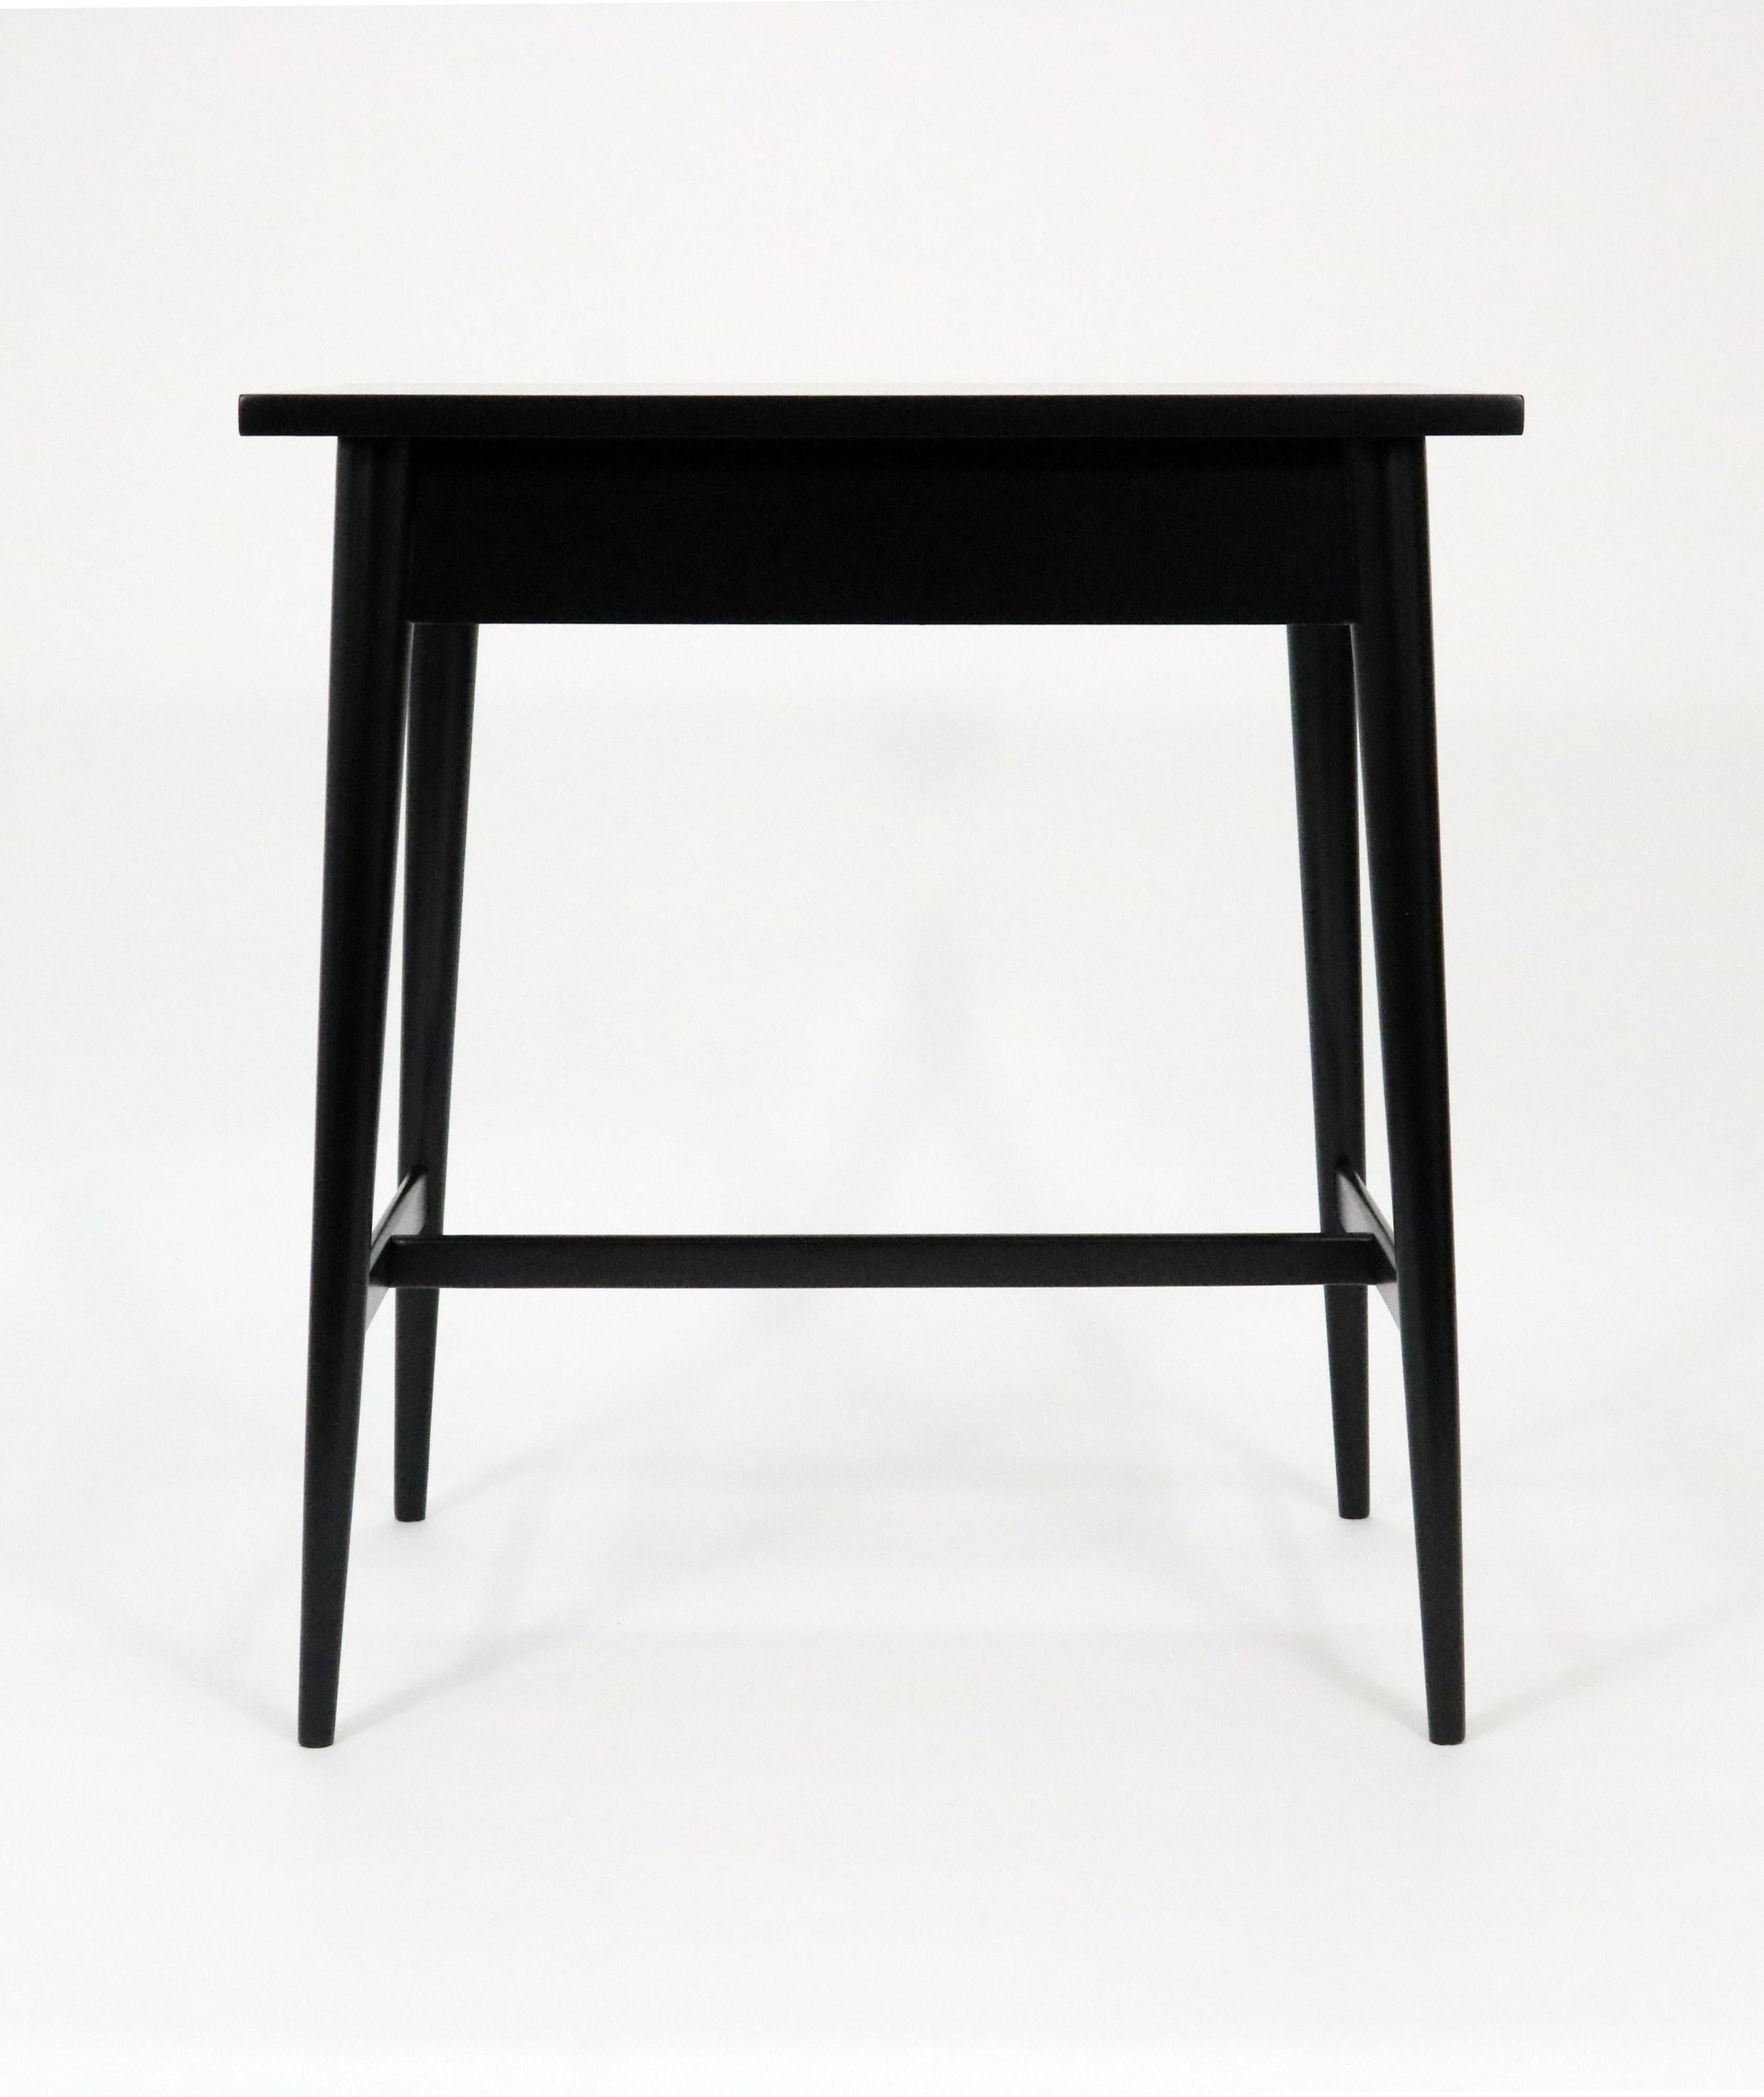 Mid-20th Century Planner Group Night Stands or End Tables by Paul McCobb for Winchendon